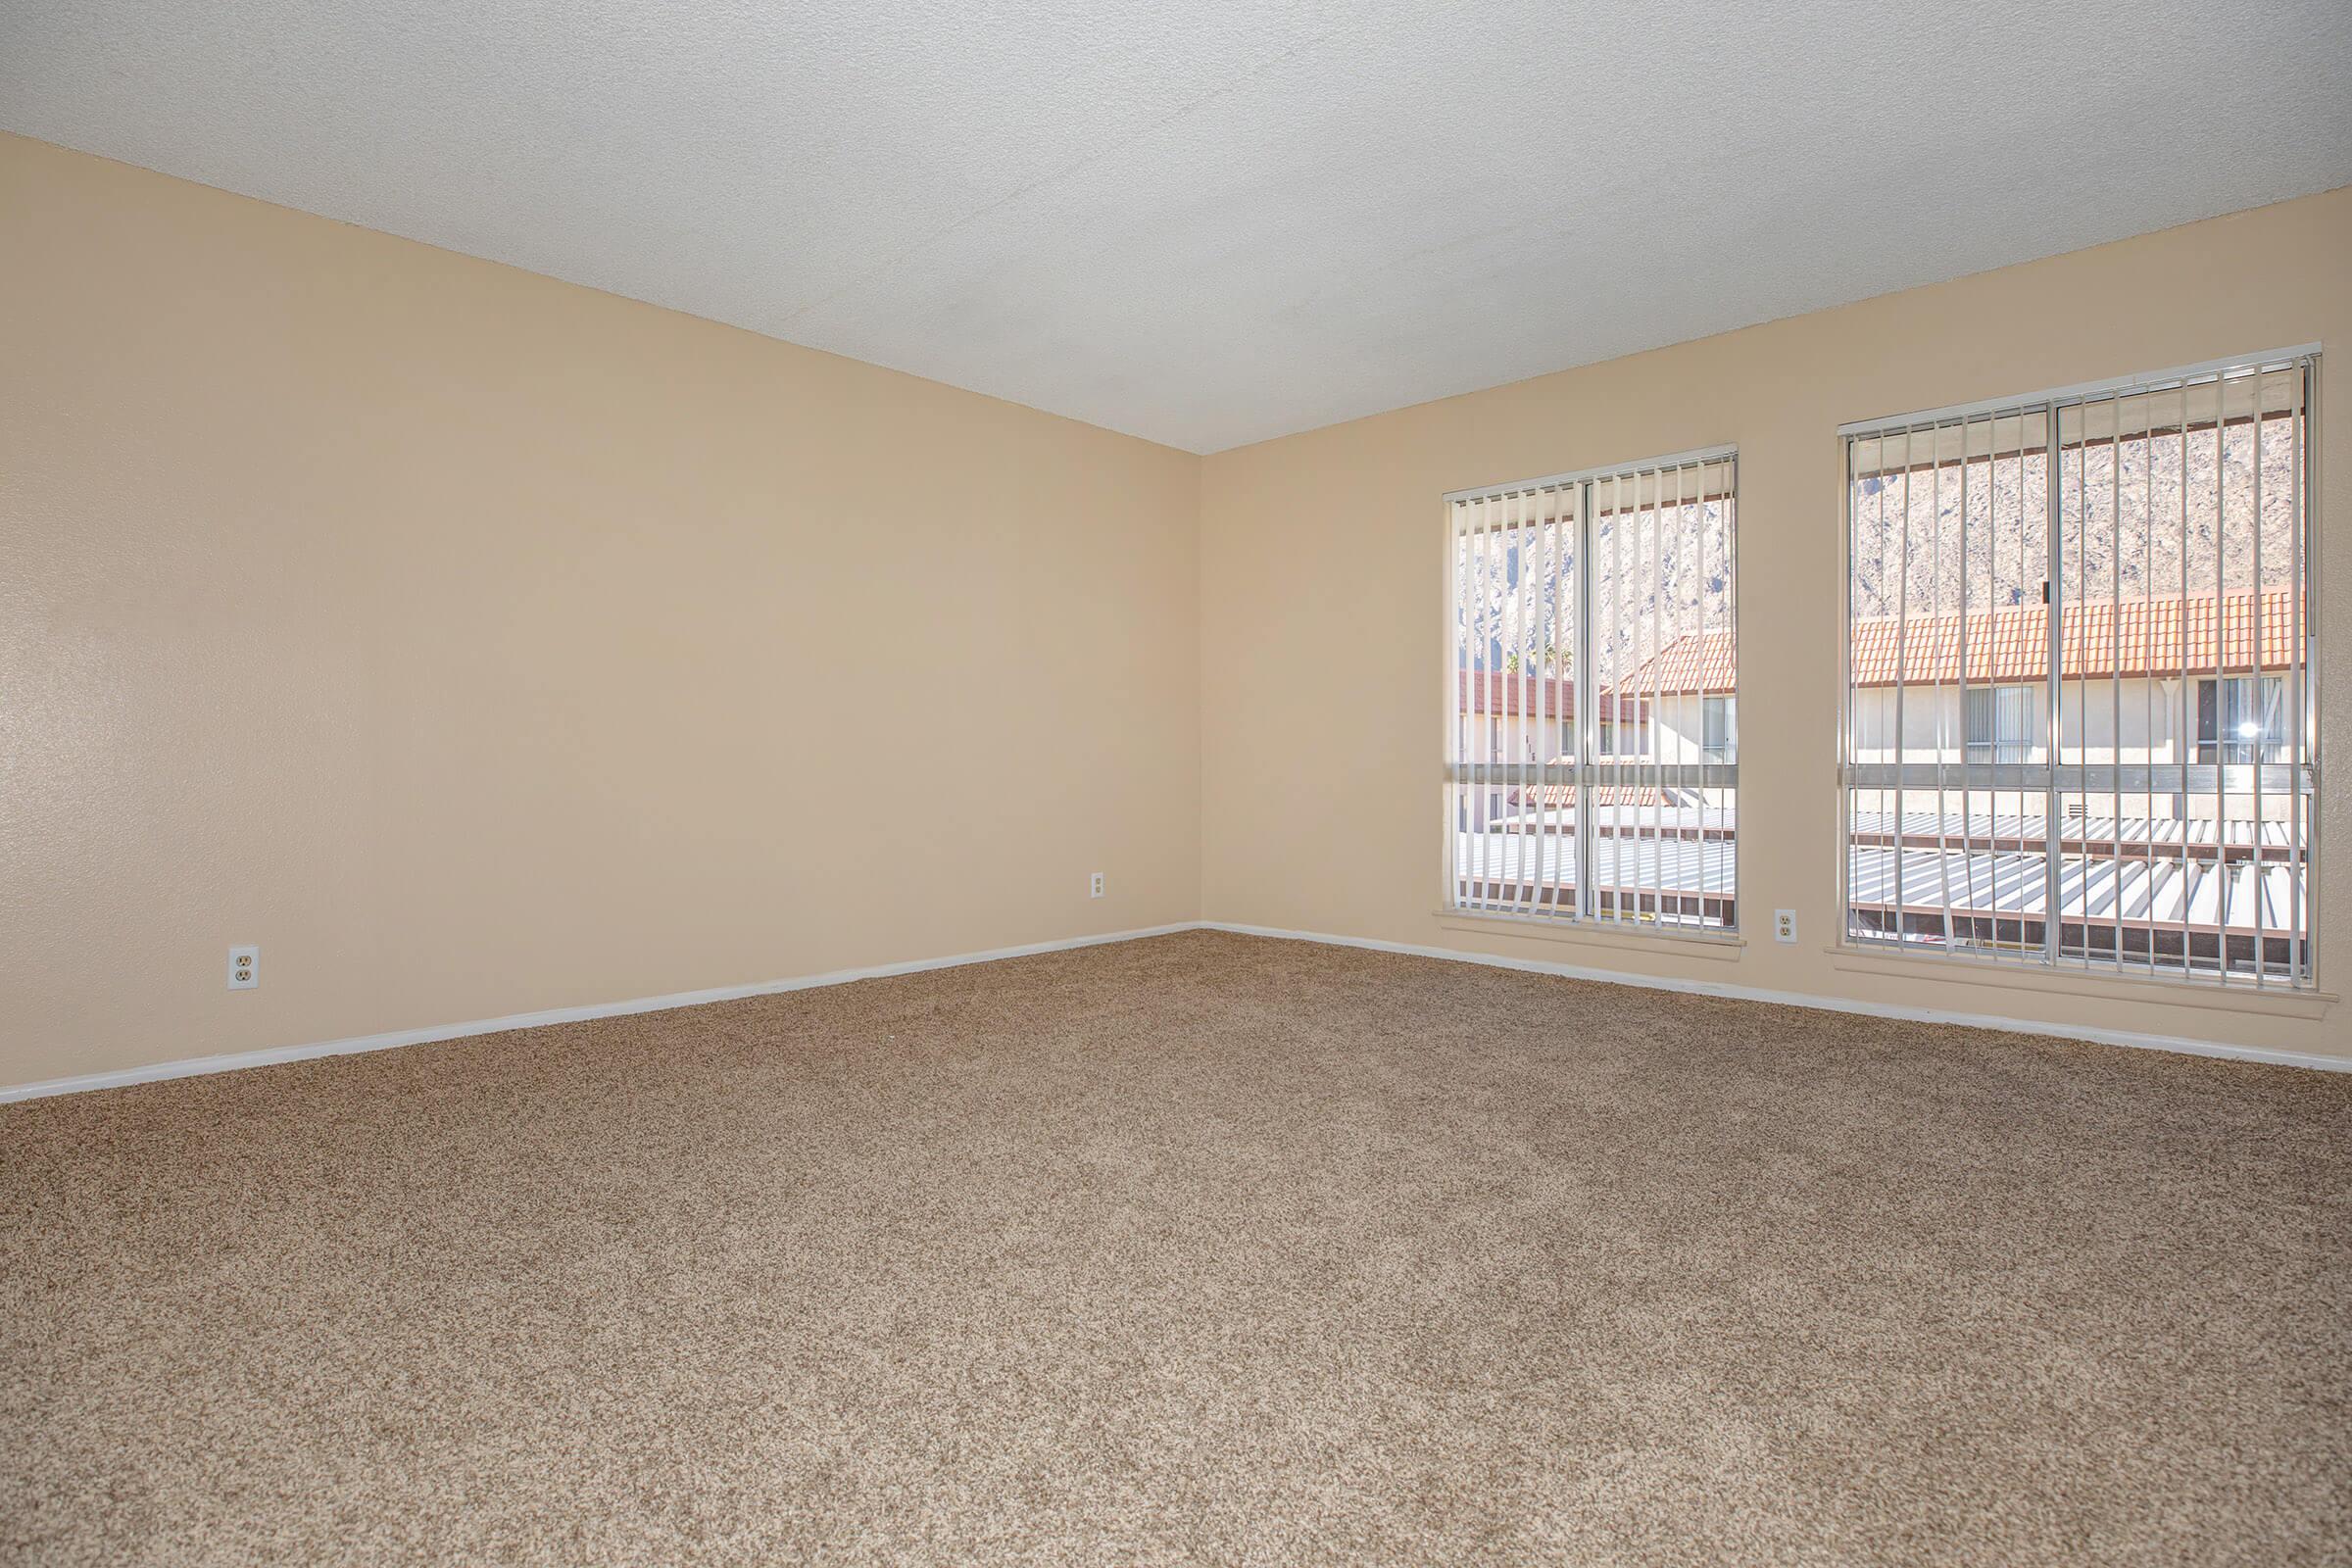 Carpeted living room with open window blinds